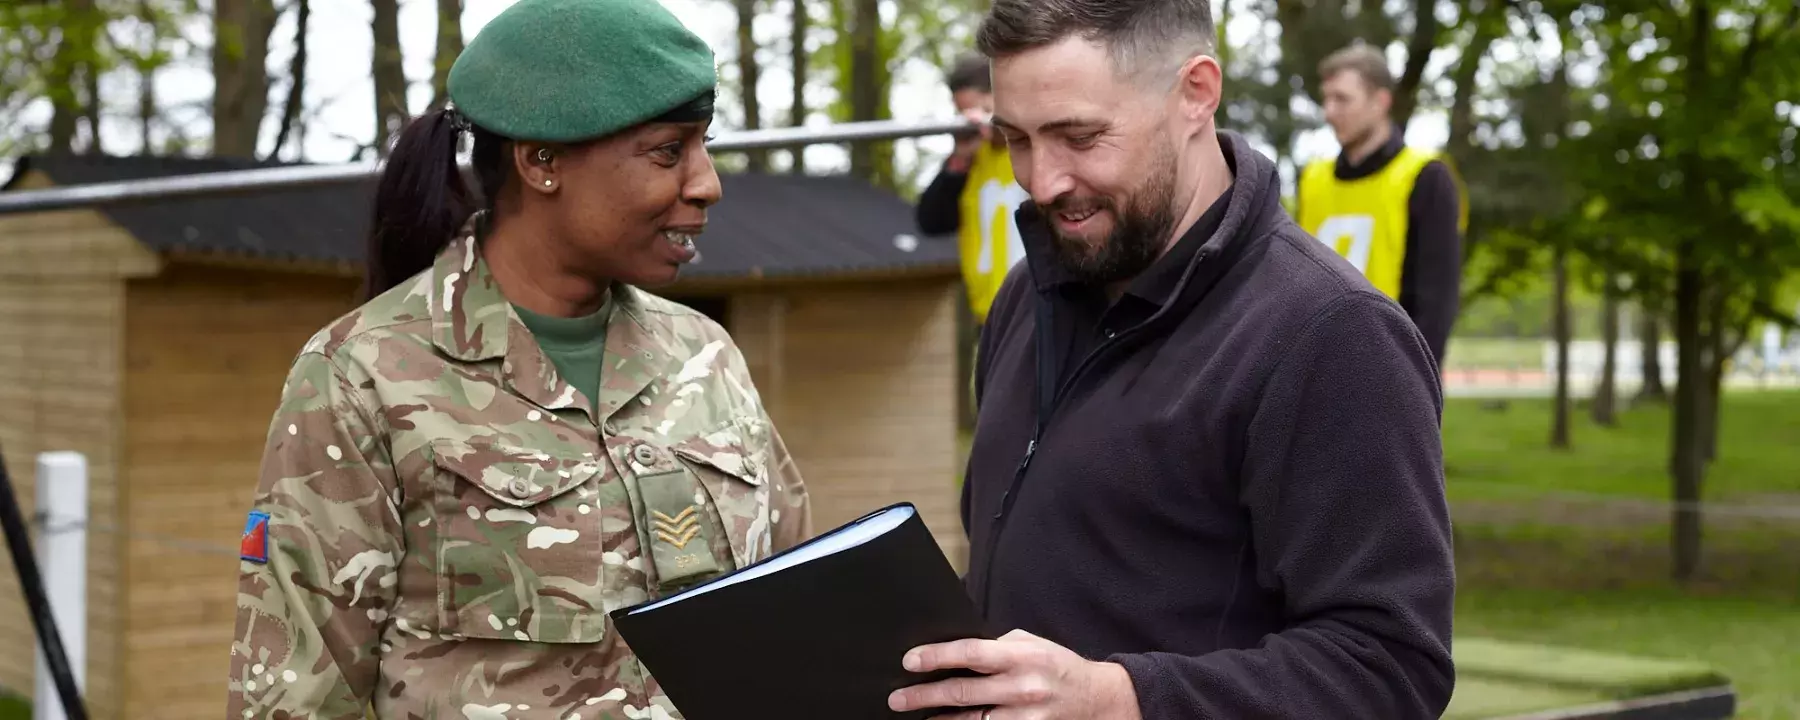 Message Received: powerful stories of resilience and dedication from the armed forces